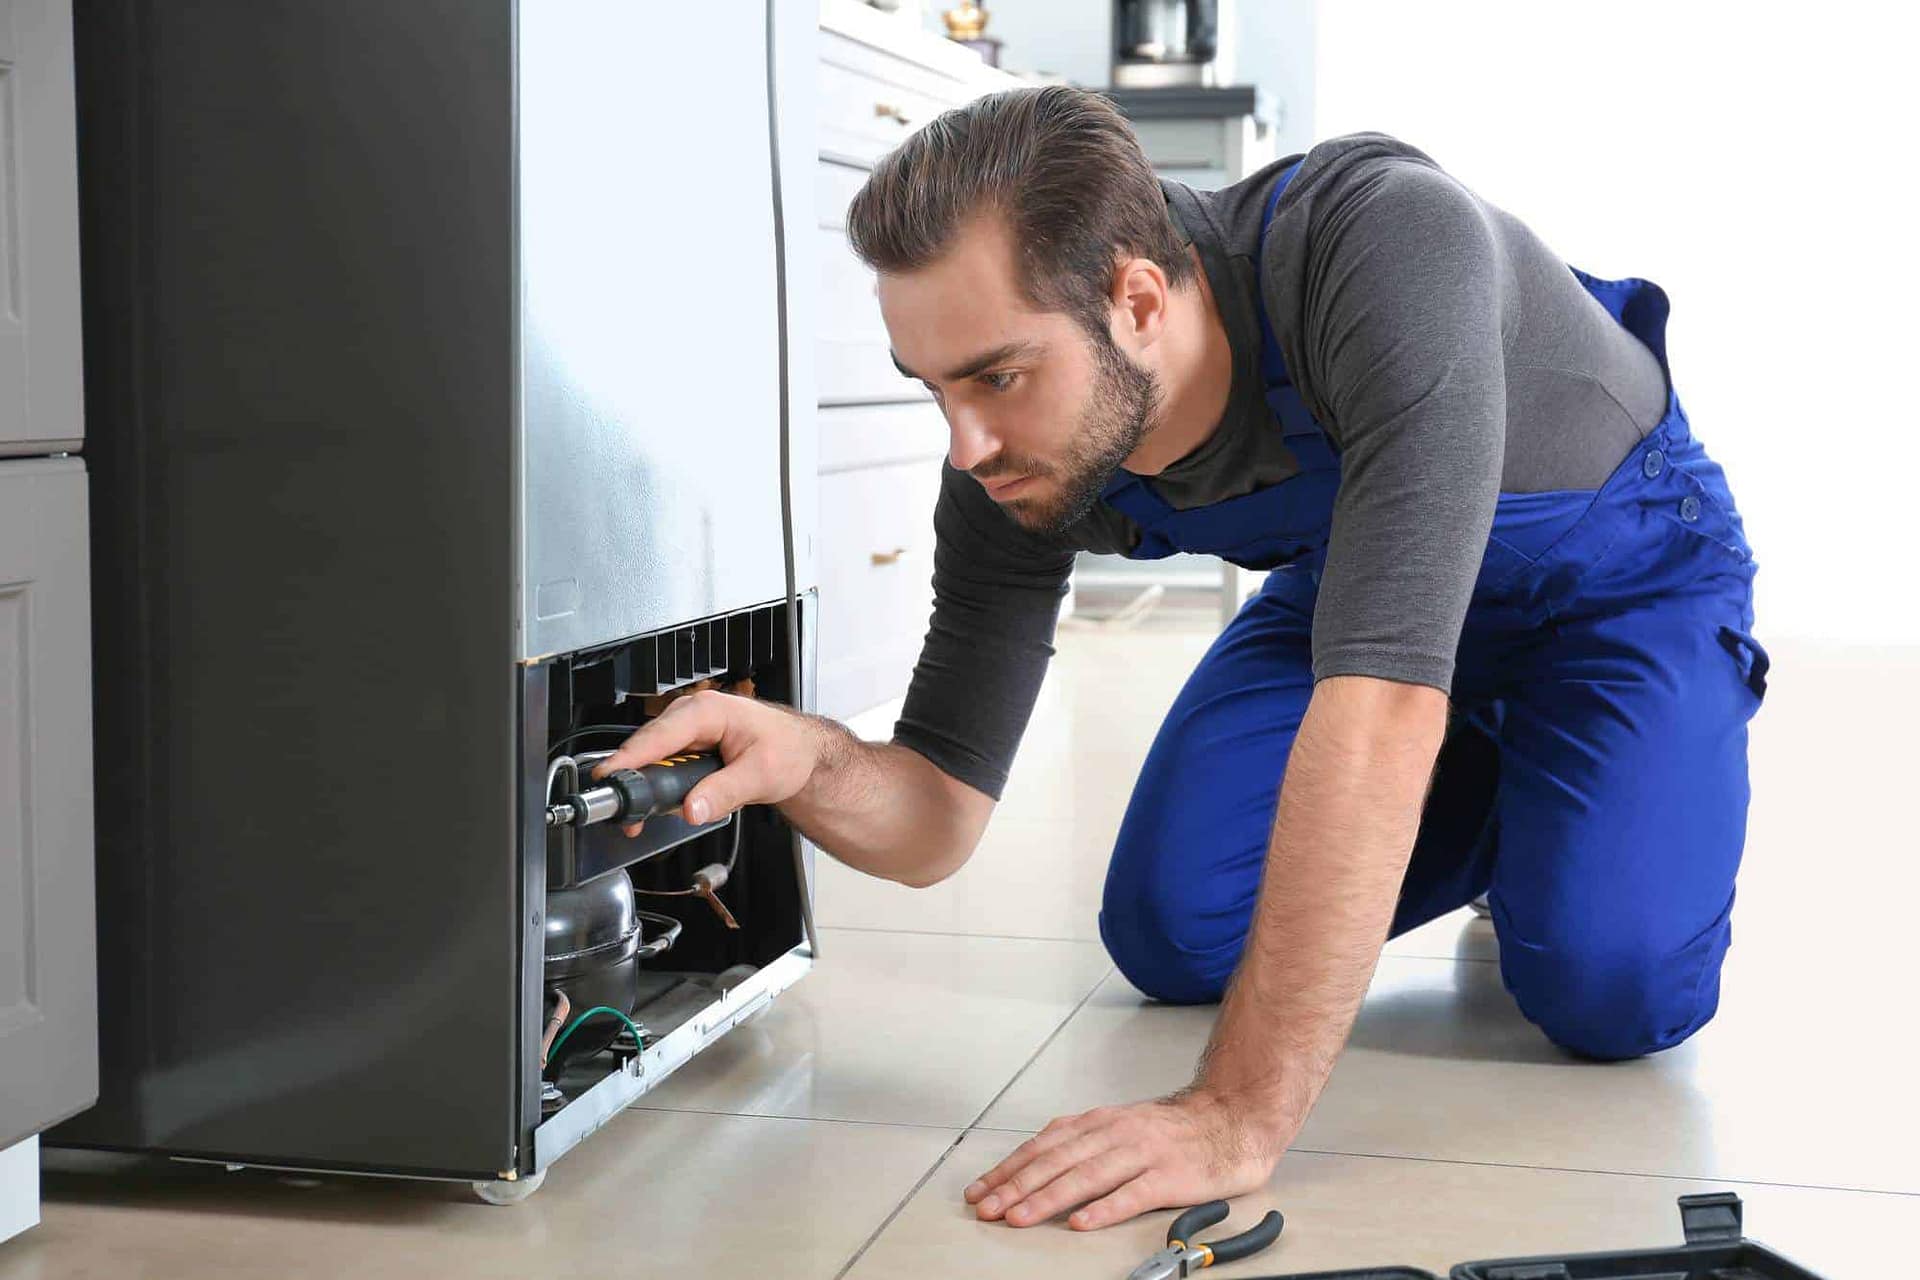 7 Most Common LG Refrigerator Problems & Troubleshooting